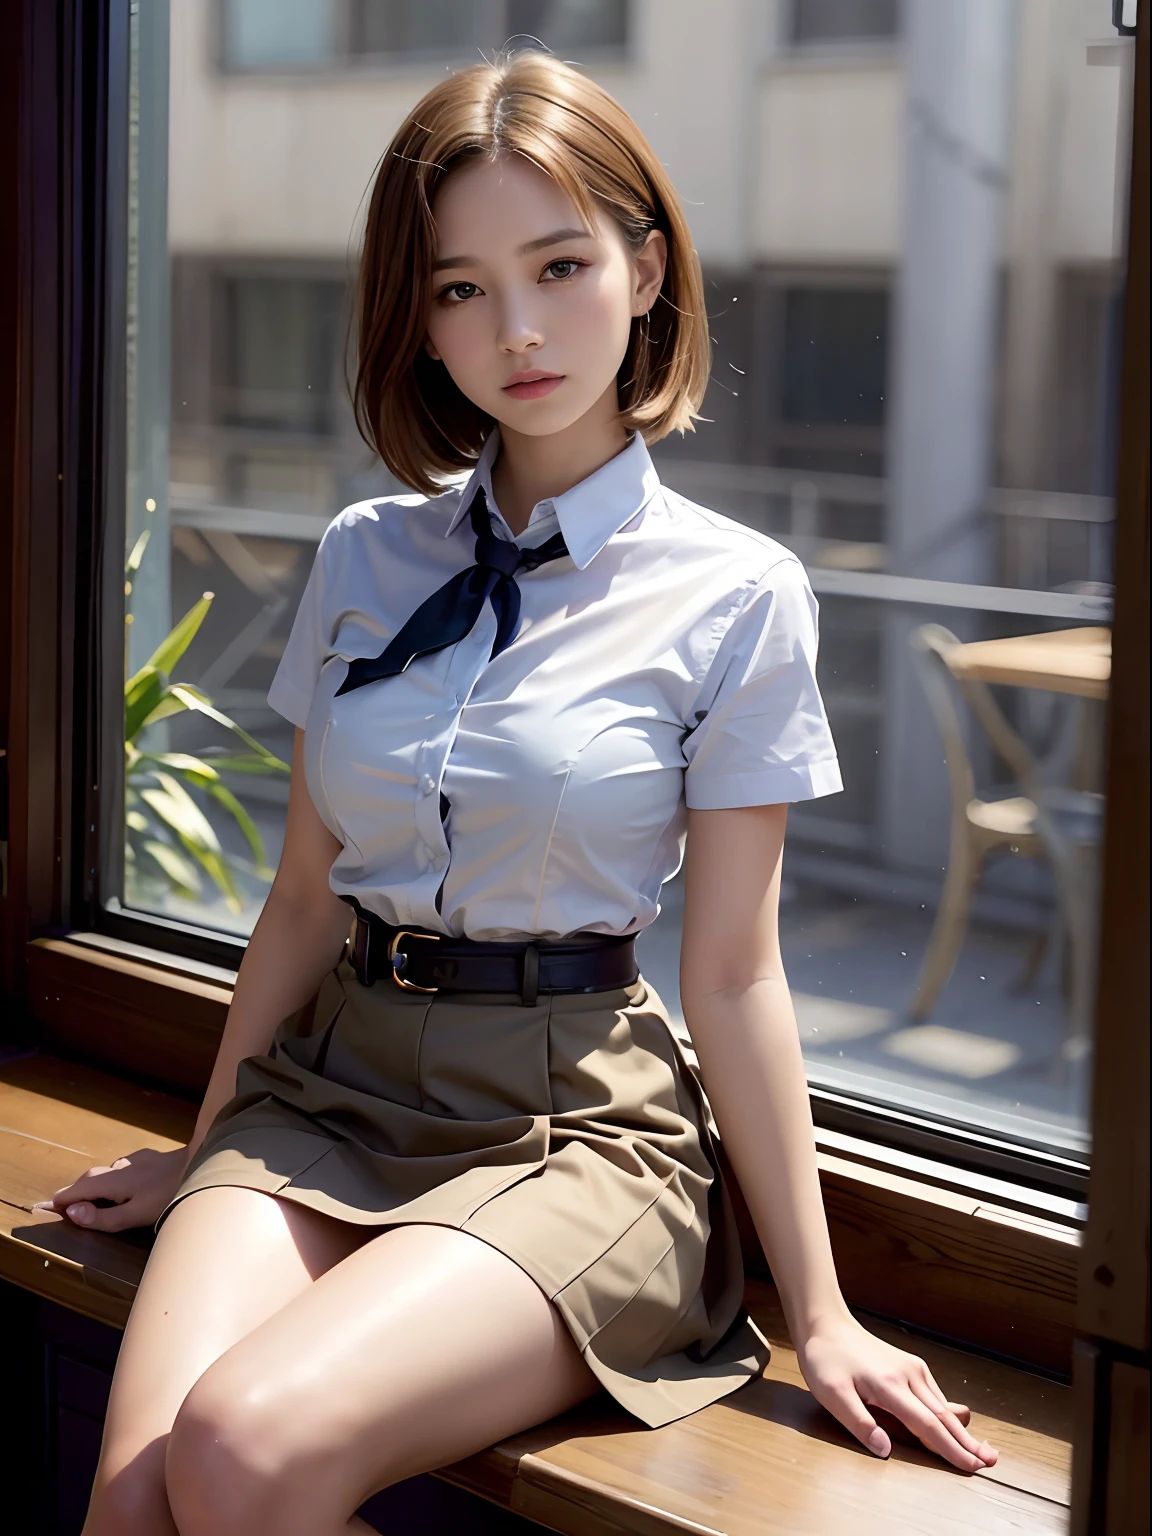 top-quality, ​masterpiece, high-detail, 16k image, Beautiful , Medium bob hair,beautiful hair of light brown color, beautiful eyes of light brown, (plump big breasts), High School Uniforms, Constricted waist, White blouse with short sleeves, pleatedskirt, High school girl sitting by window in café, red blush, Behind the window, Rain falls softly, City lights create a beautiful scene,